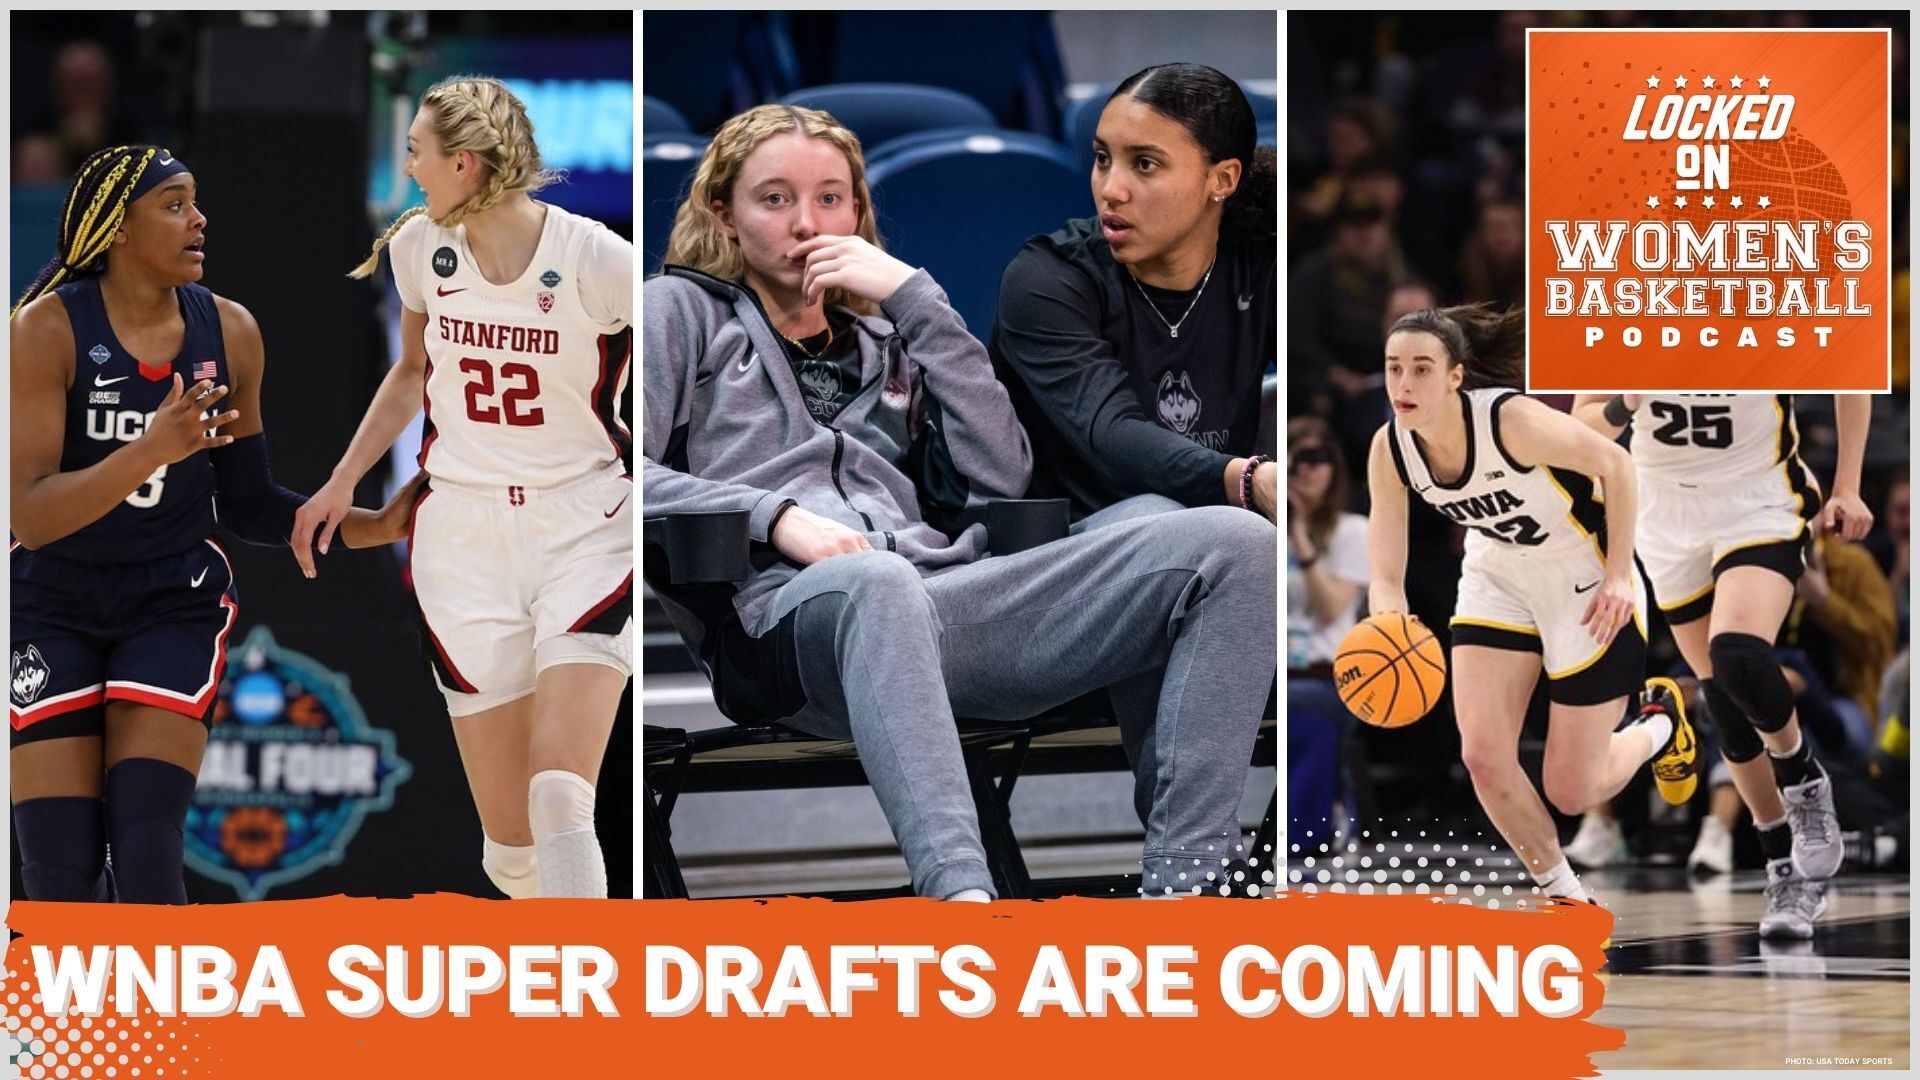 Locked on Women's Basketball Super drafts? The Next